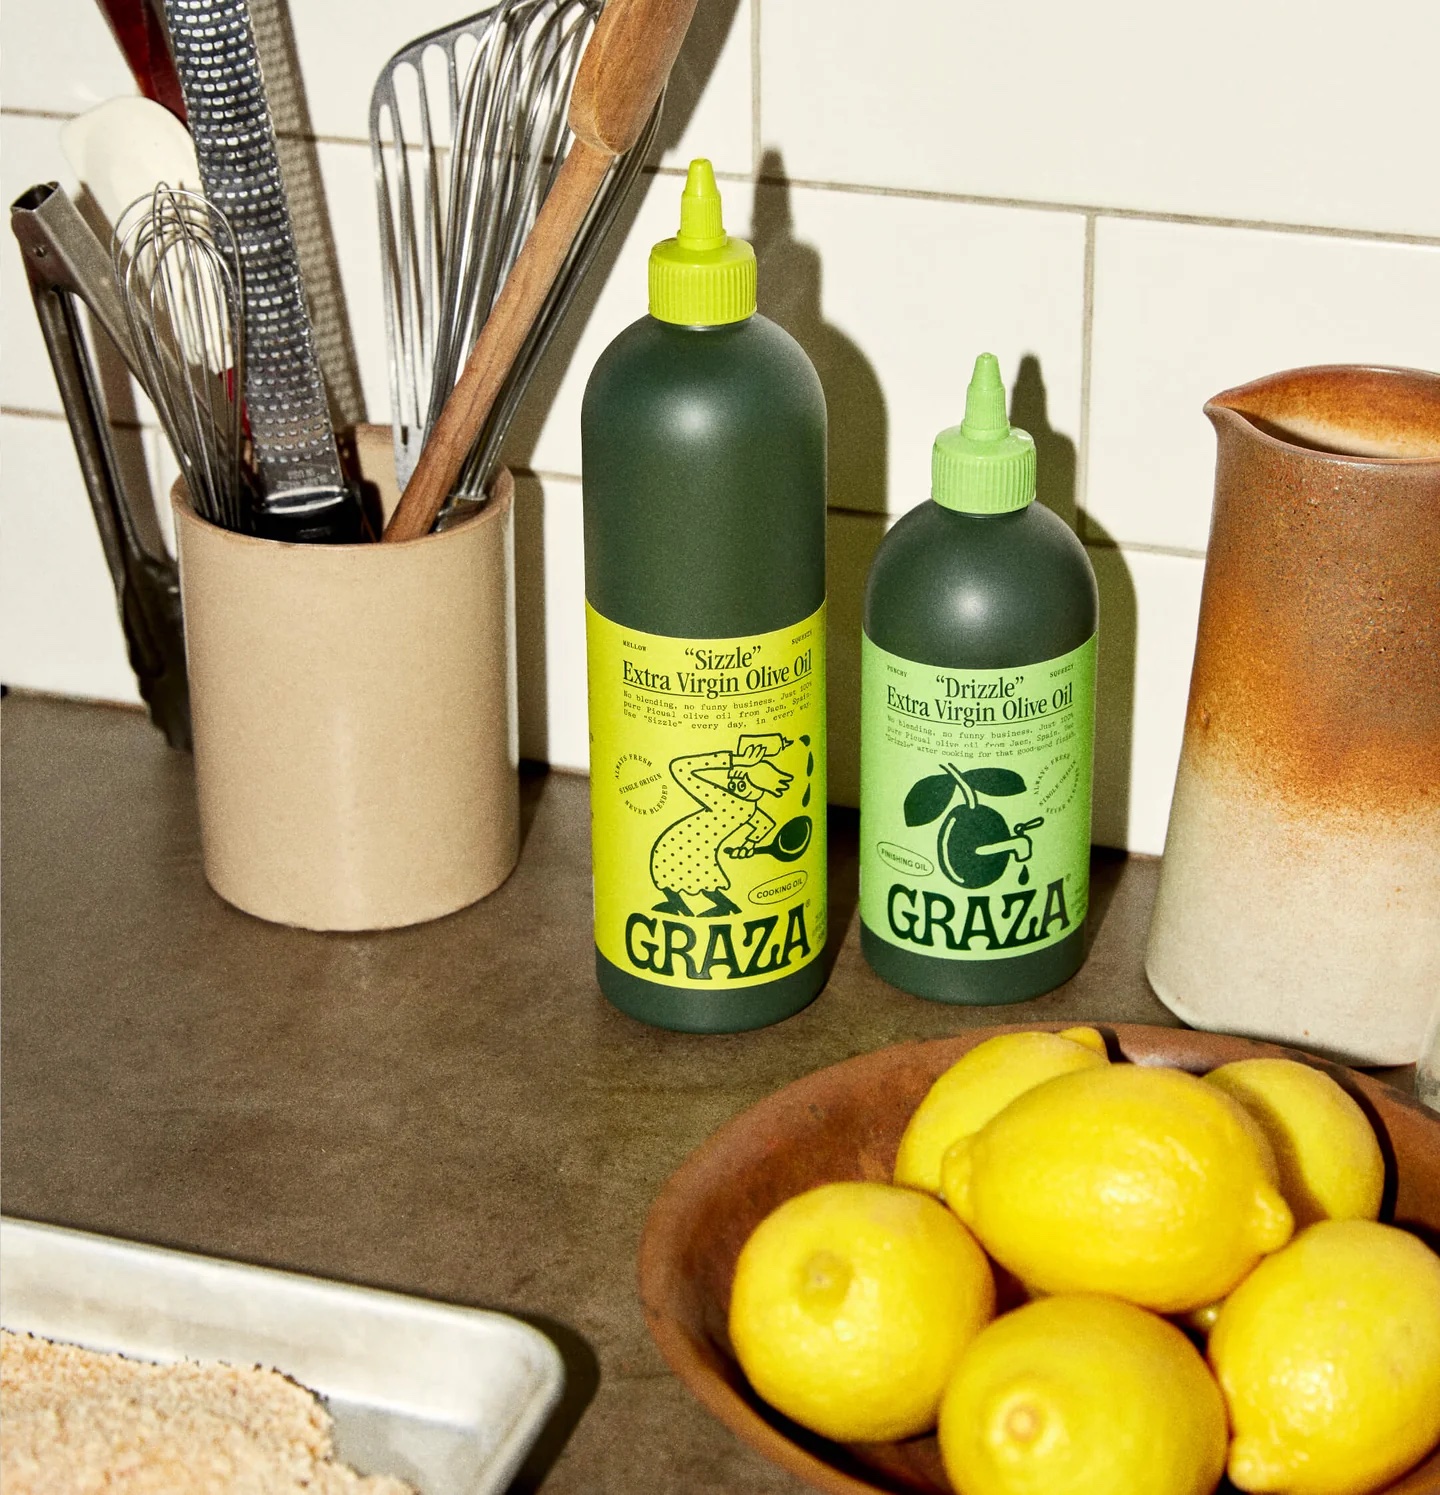 Two bottles of Graza olive oil on the counter.